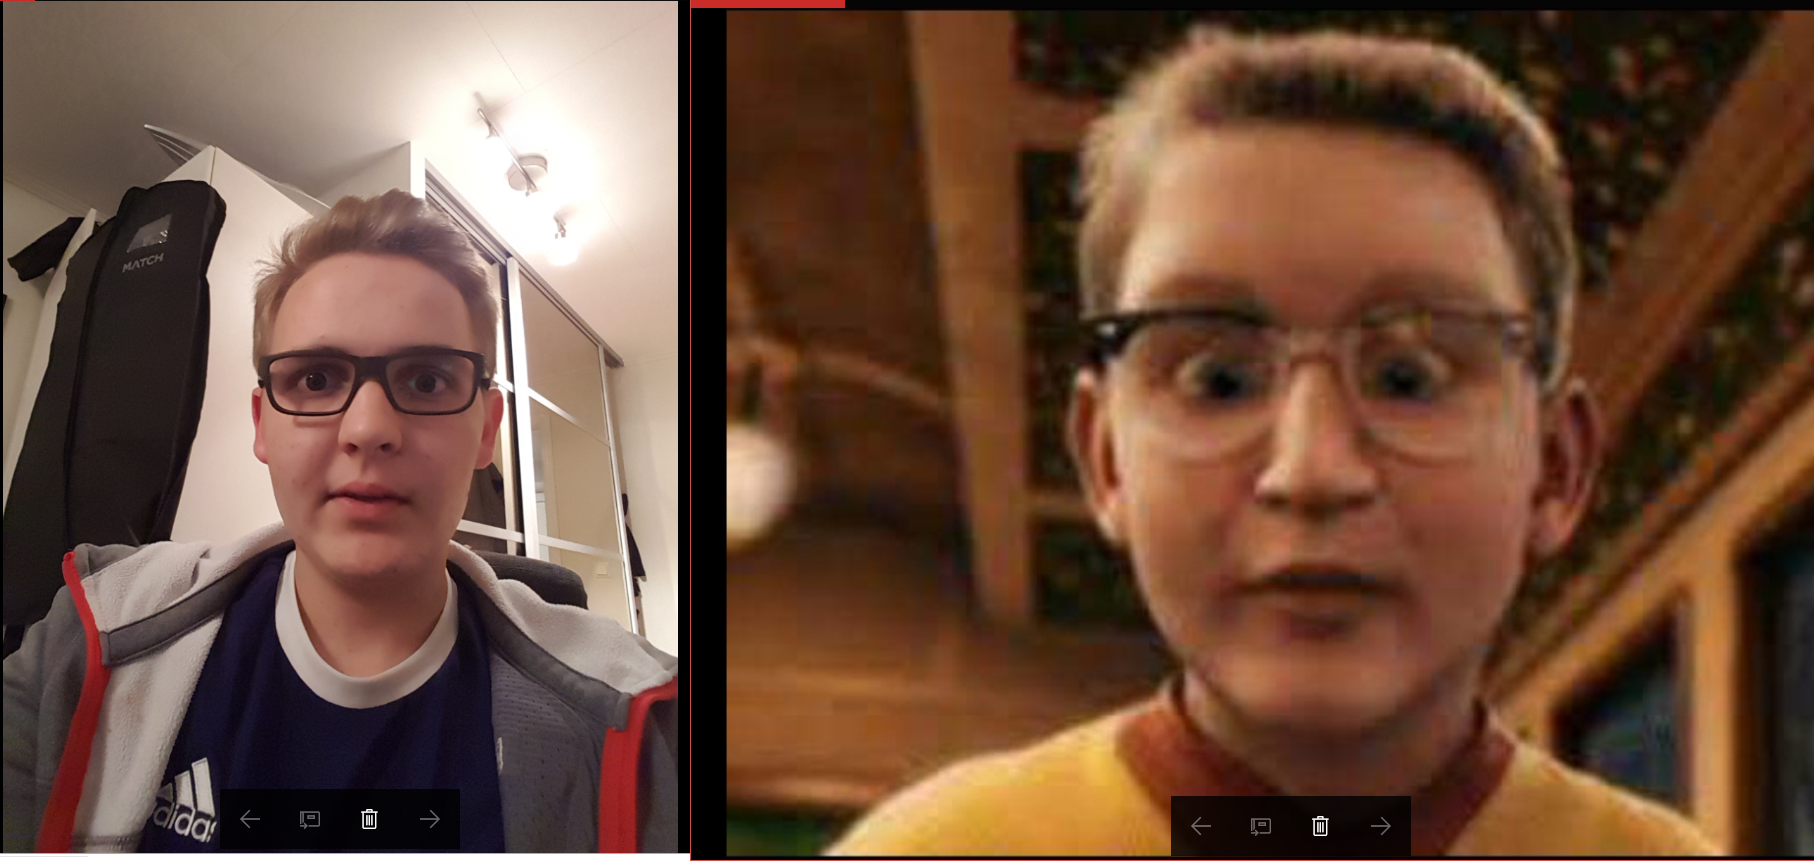 Some friends told me I looked like the kid from the polar express.